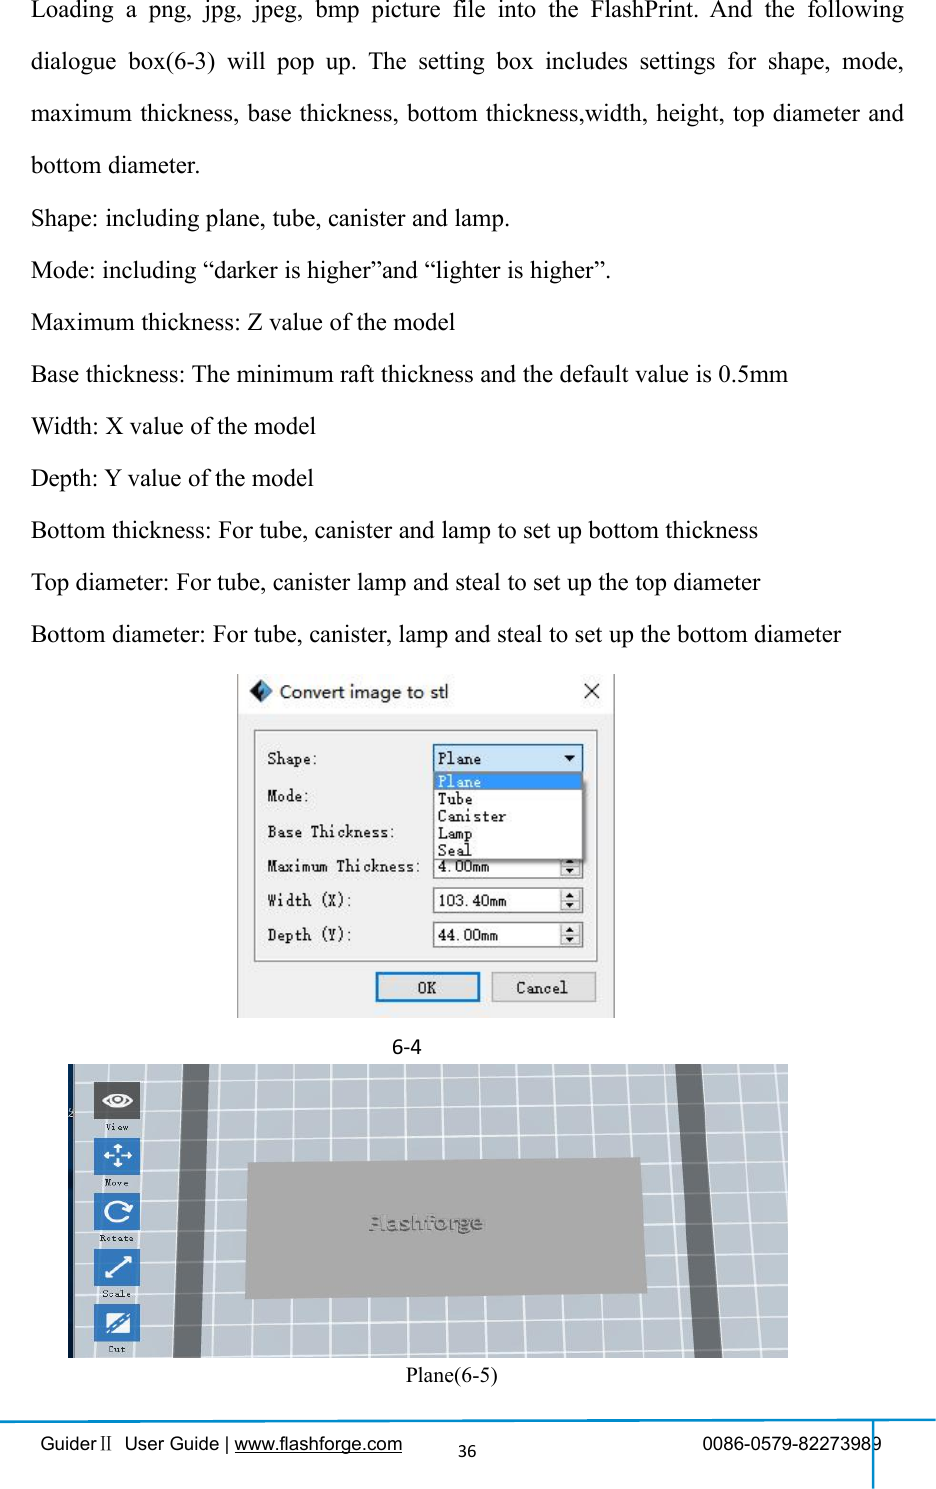 GuiderⅡUser Guide | www.flashforge.com 0086-0579-8227398936Loading a png, jpg, jpeg, bmp picture file into the FlashPrint. And the followingdialogue box(6-3) will pop up. The setting box includes settings for shape, mode,maximum thickness, base thickness, bottom thickness,width, height, top diameter andbottom diameter.Shape: including plane, tube, canister and lamp.Mode: including “darker is higher”and “lighter is higher”.Maximum thickness: Z value of the modelBase thickness: The minimum raft thickness and the default value is 0.5mmWidth: X value of the modelDepth: Y value of the modelBottom thickness: For tube, canister and lamp to set up bottom thicknessTop diameter: For tube, canister lamp and steal to set up the top diameterBottom diameter: For tube, canister, lamp and steal to set up the bottom diameter6-4Plane(6-5)